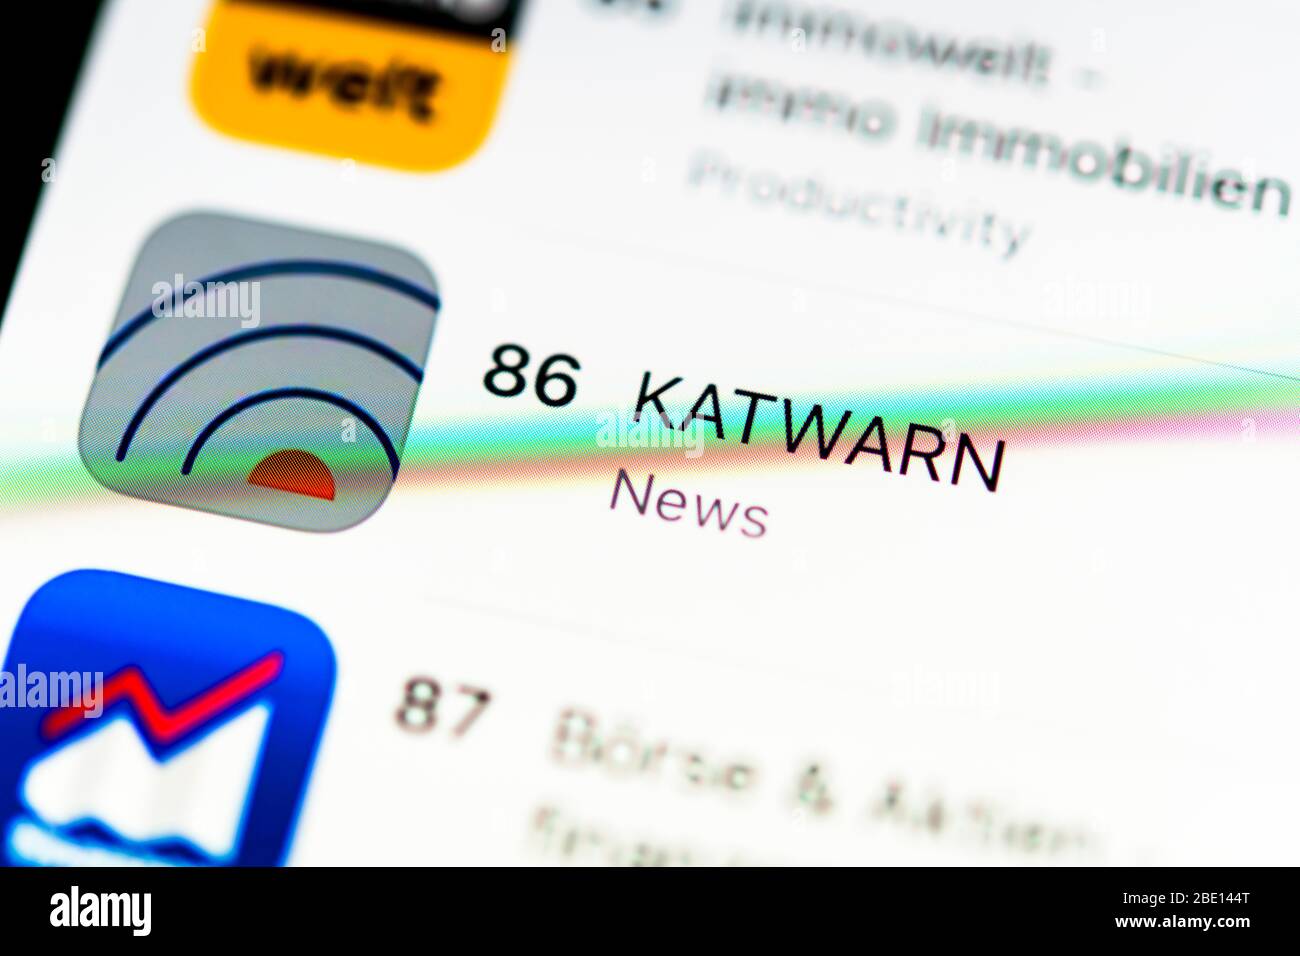 Katwarn App, catastrophe warning system, app icon, display on mobile phone, smartphone, detail, full format Stock Photo